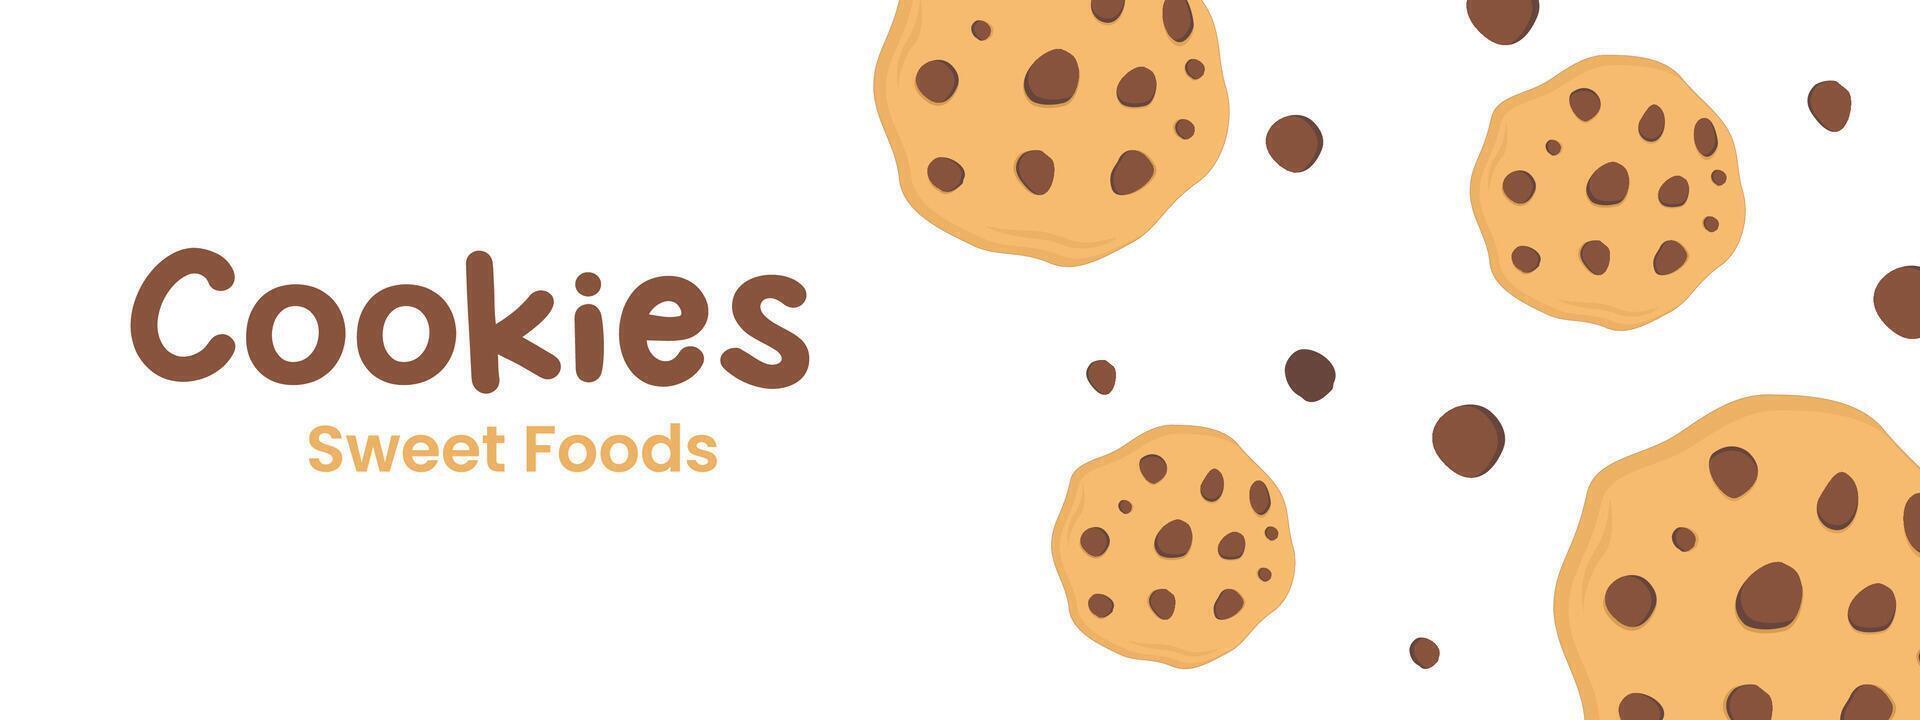 cartoon illustration of chocolate chip butter cookies with copy space for text in the form of a banner or background vector